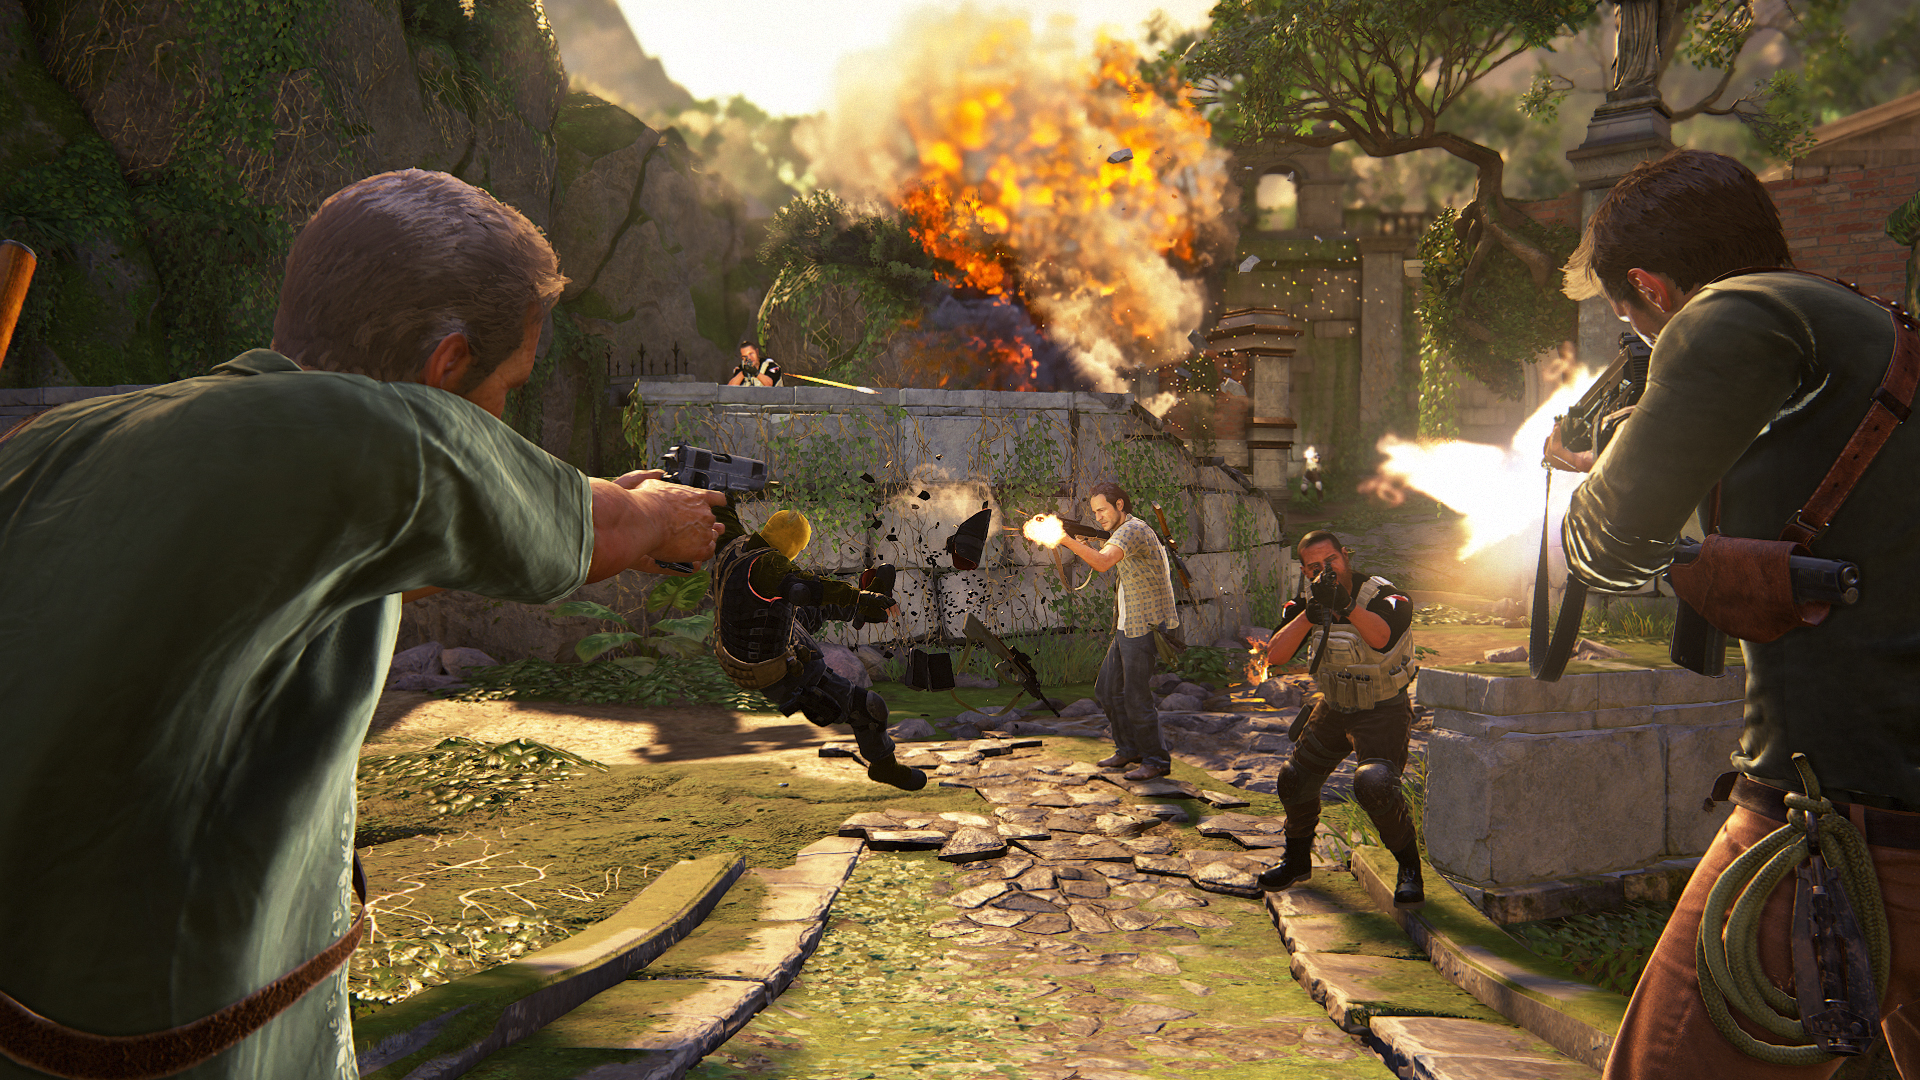 Uncharted 4 Survival mode announced